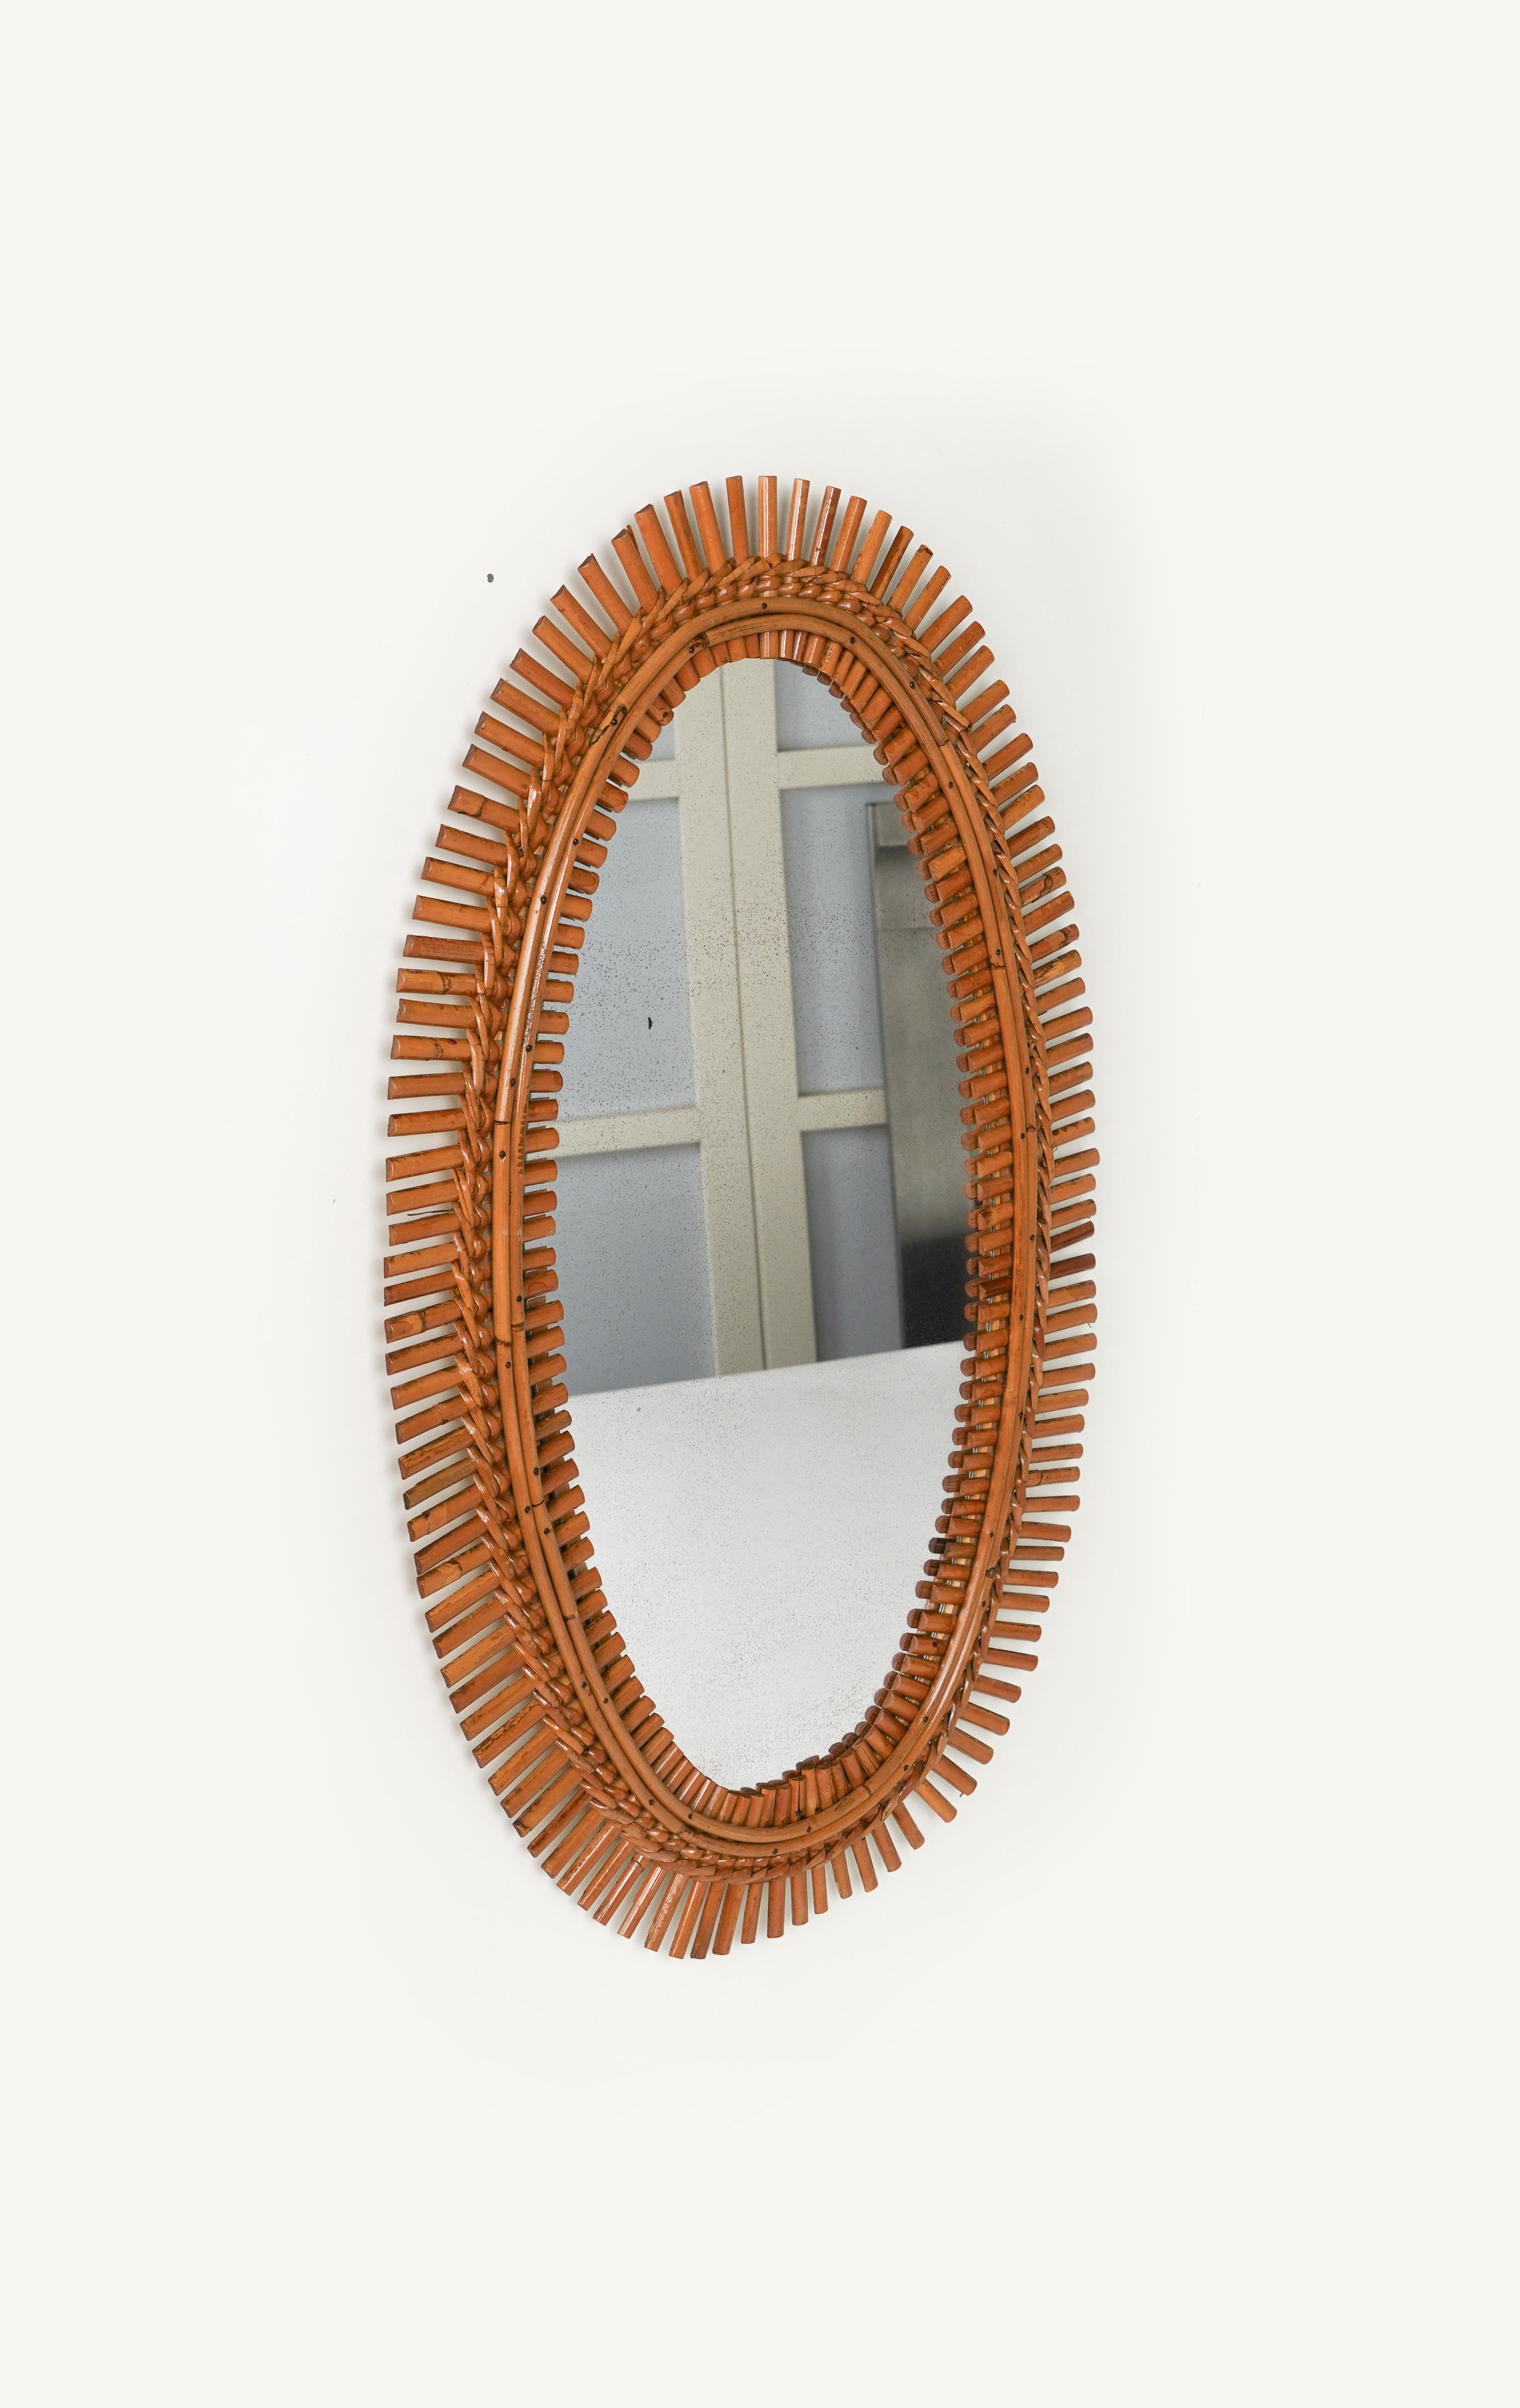 Midcentury Rattan and Bamboo Oval Wall Mirror, Italy 1960s For Sale 2